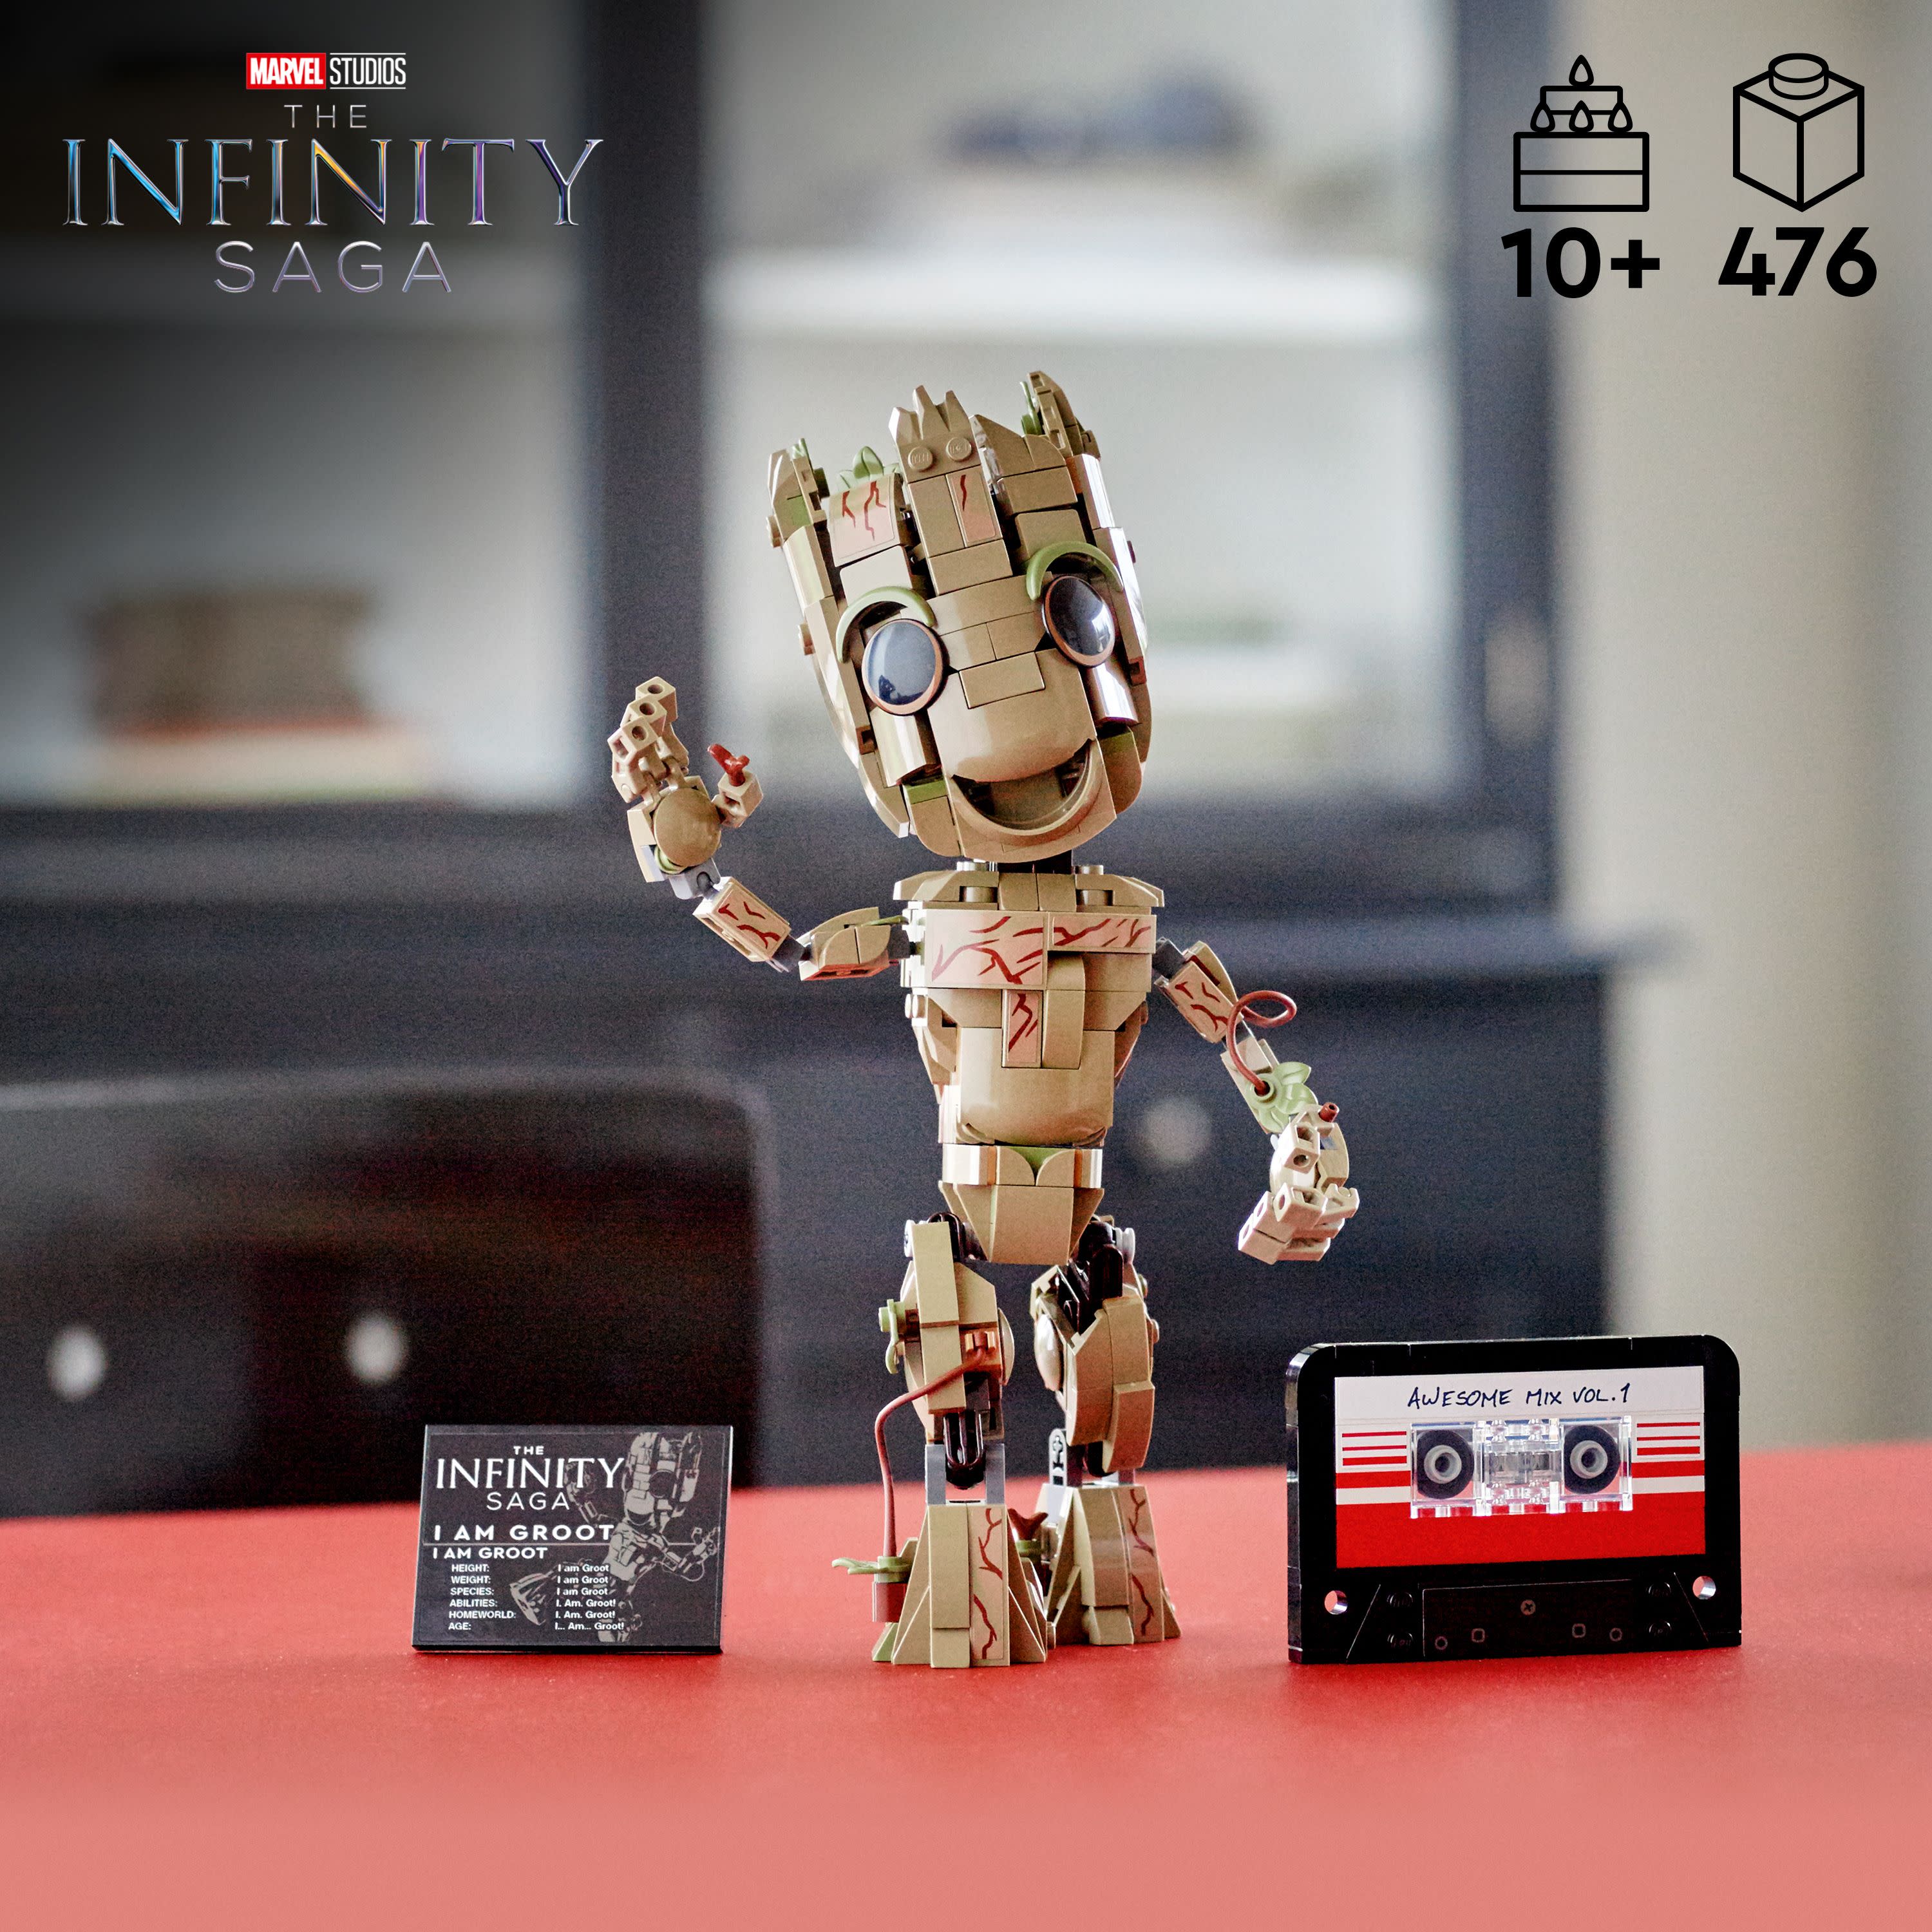 LEGO Marvel I am Groot Buildable Toy, 76217 Guardians of the Galaxy 2 Set, Collectable Baby Groot Model Figure, Gift Idea - image 5 of 9